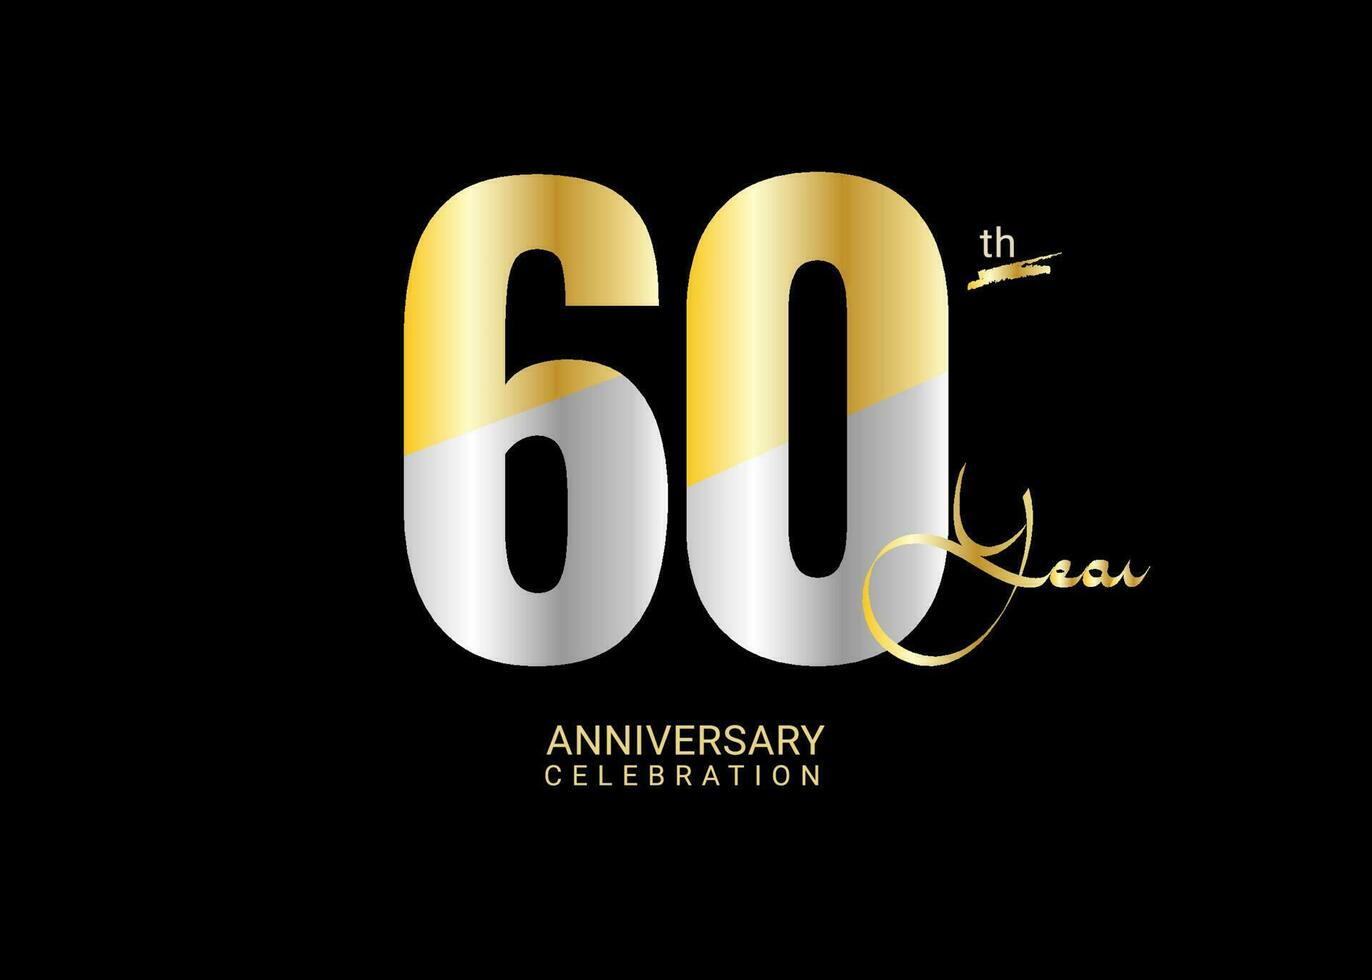 60 Years Anniversary Celebration gold and silver Vector Template, 60 number logo design, 60th Birthday Logo,  logotype Anniversary, Vector Anniversary For Celebration, poster, Invitation Card